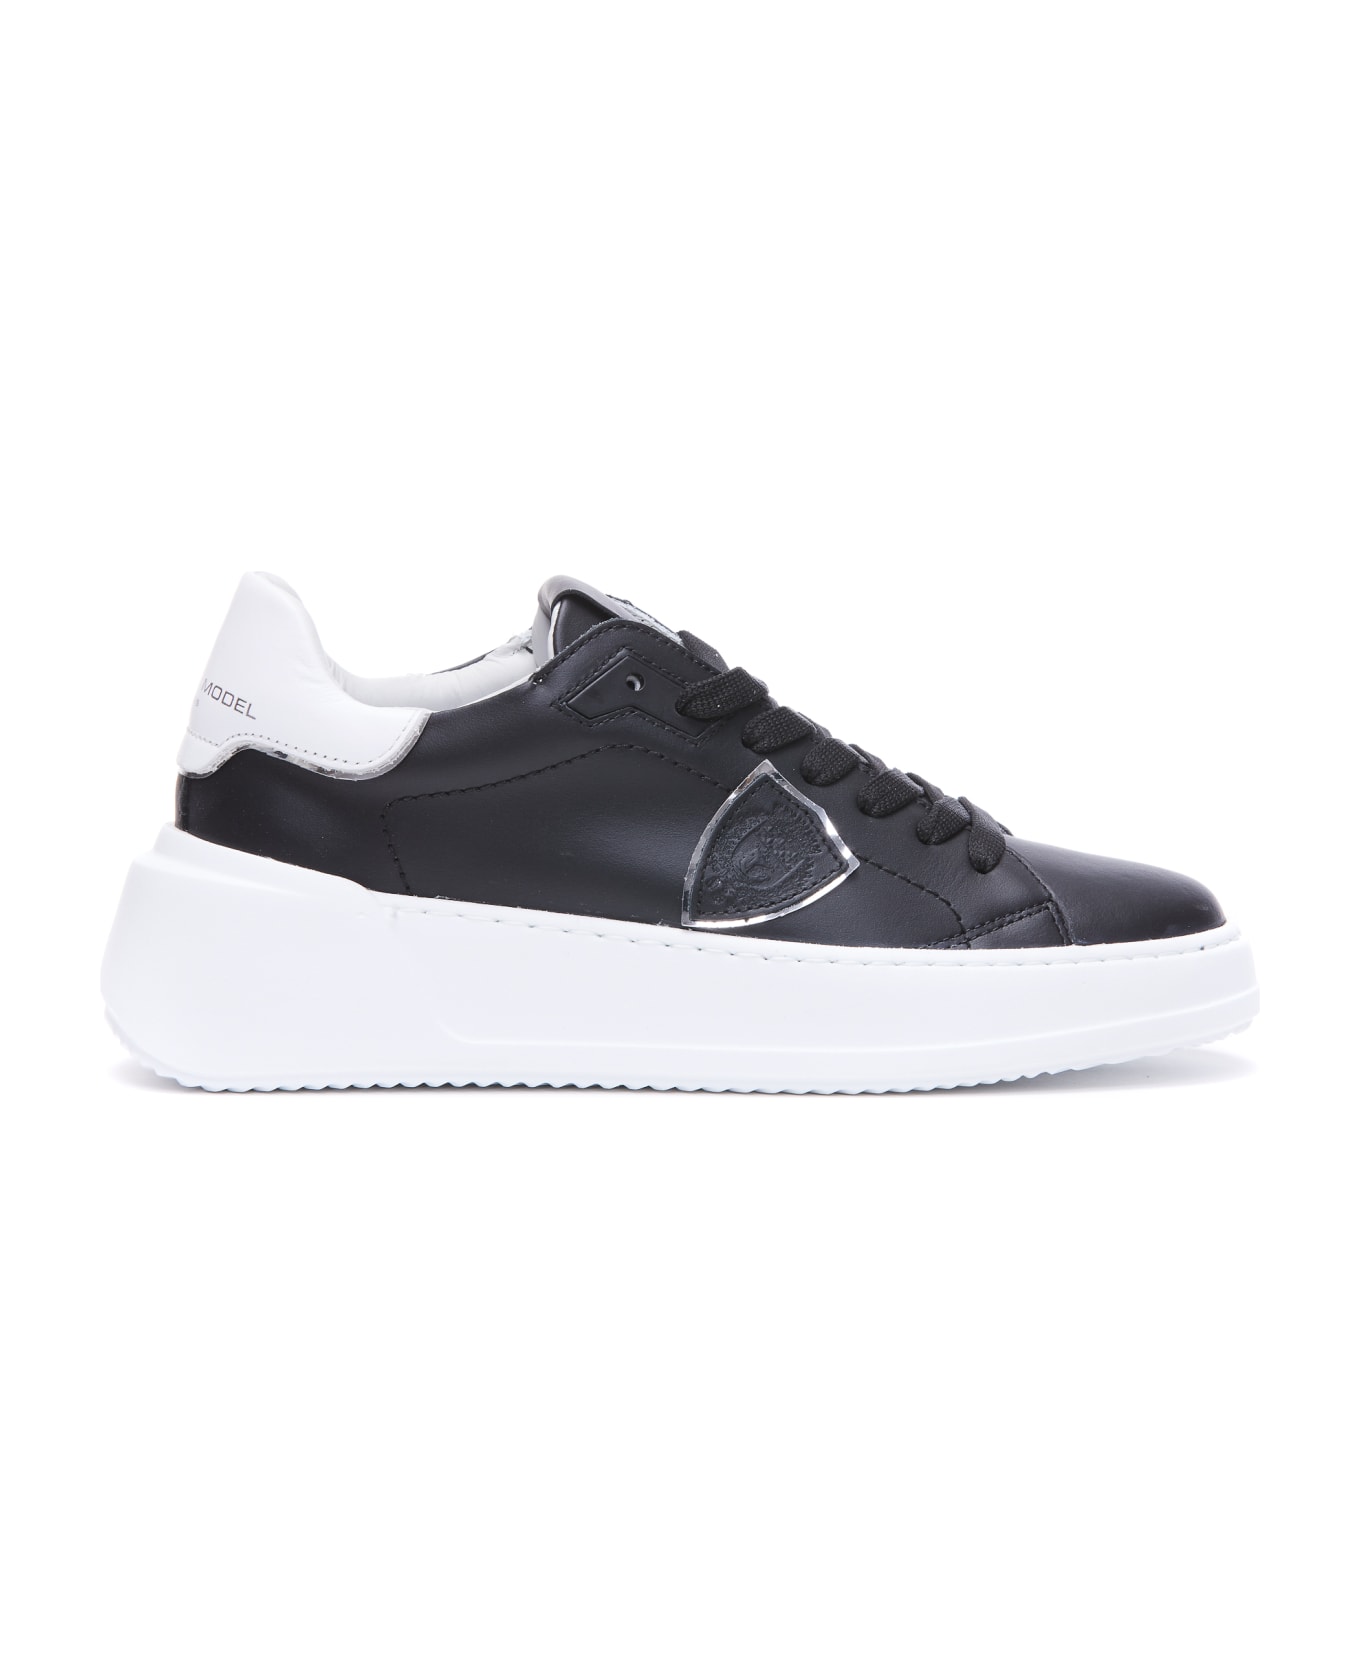 Philippe Model Tres Temple Low Sneakers - Black ウェッジシューズ